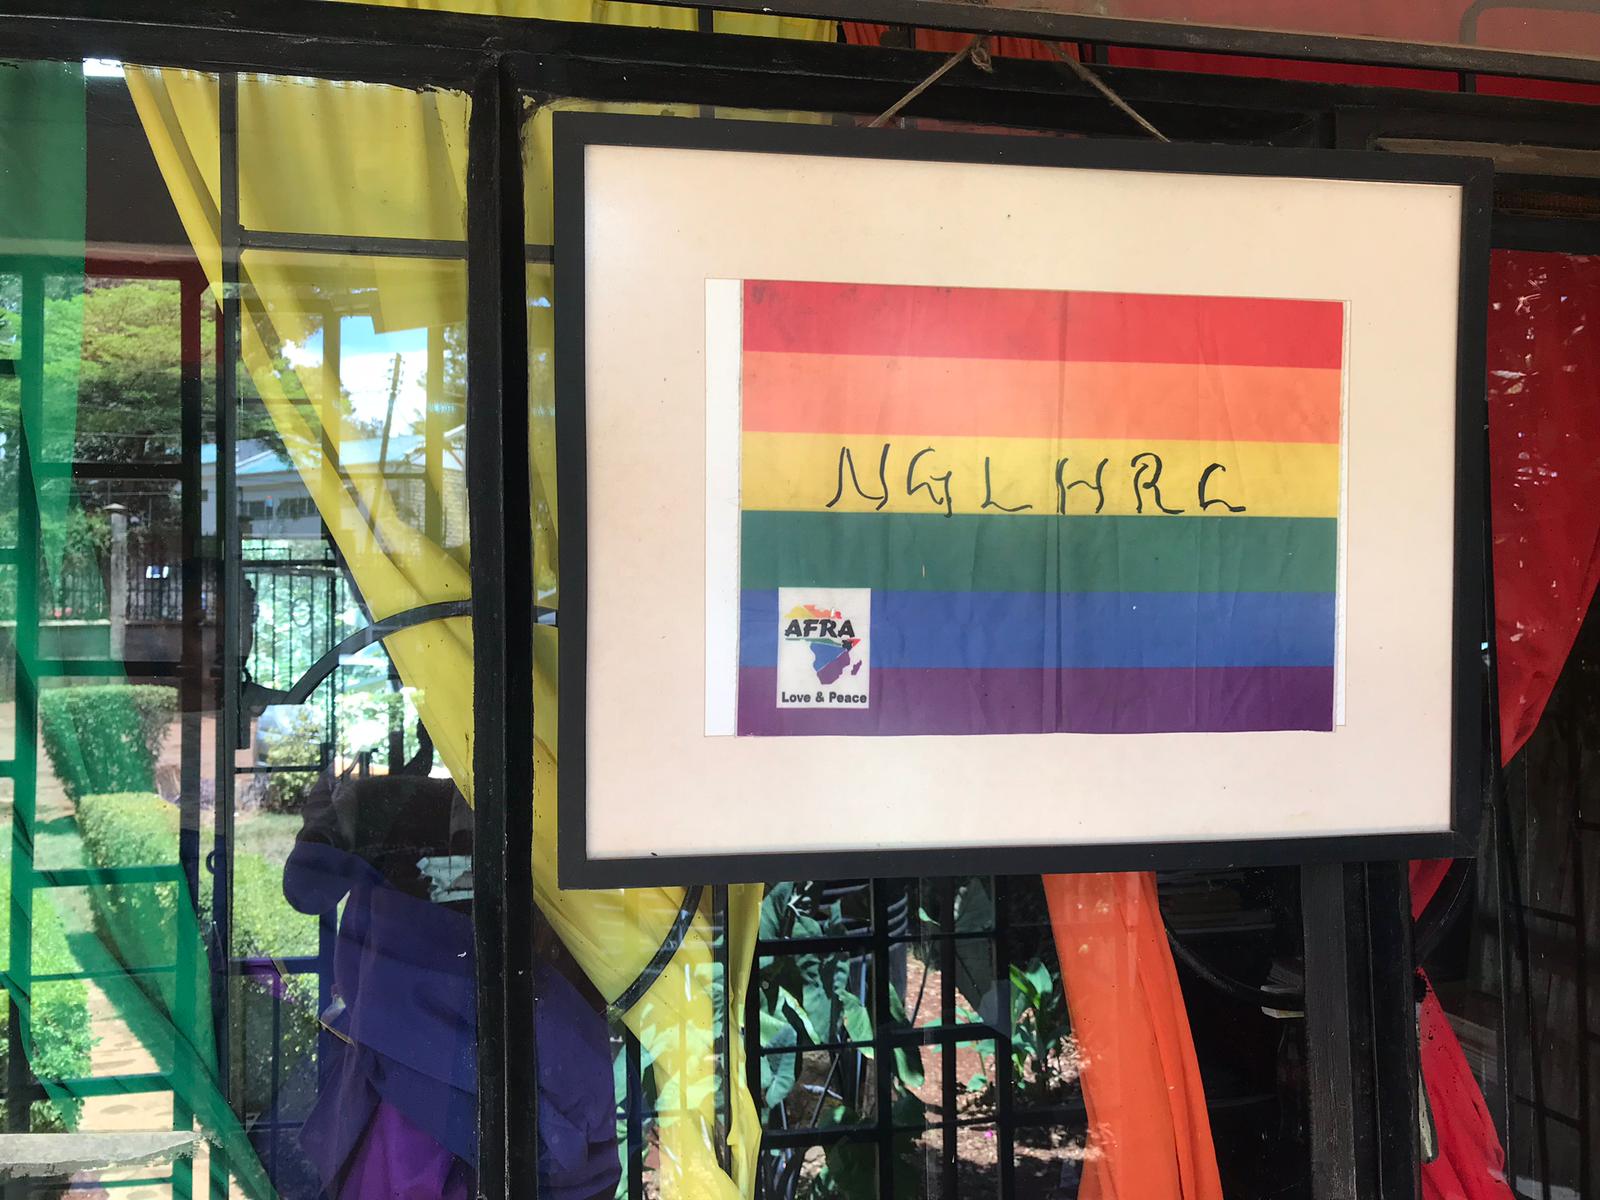 Fighting for rights without taking to the streets – the battle for LGBTI rights in Kenya